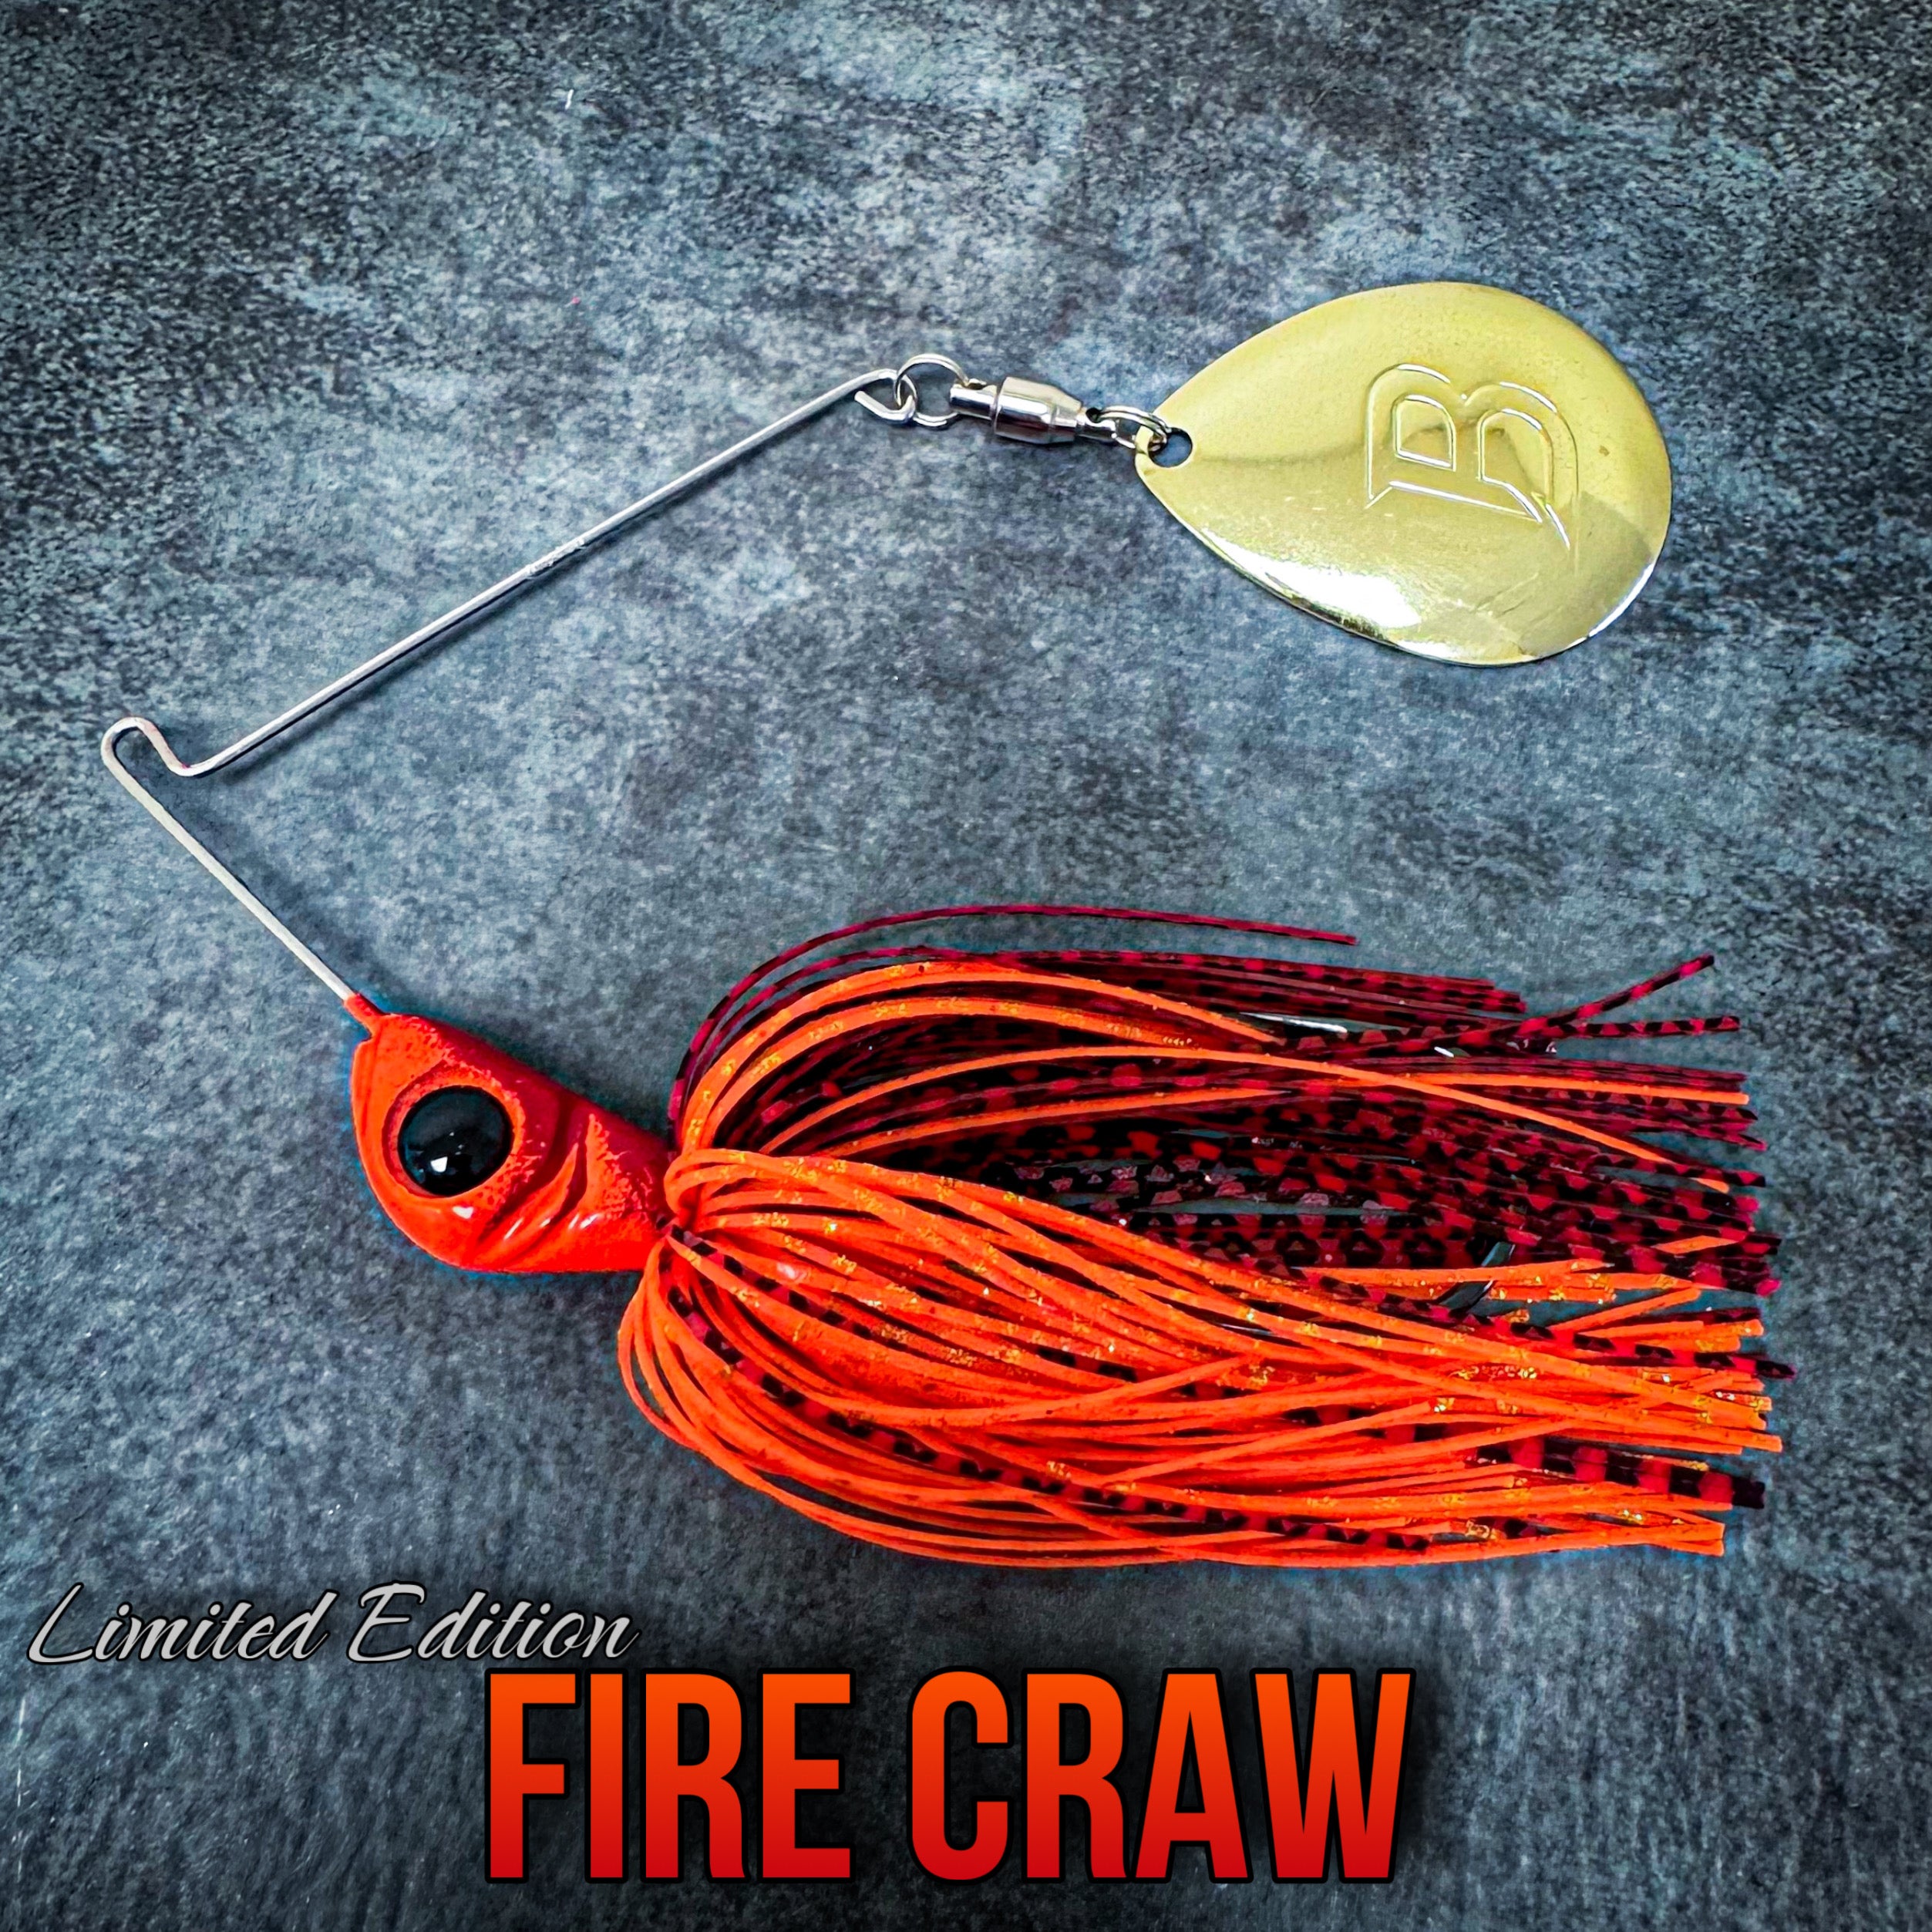 Limited Fire Craw Thump GOLD Blade - 5/8oz — Made to order please